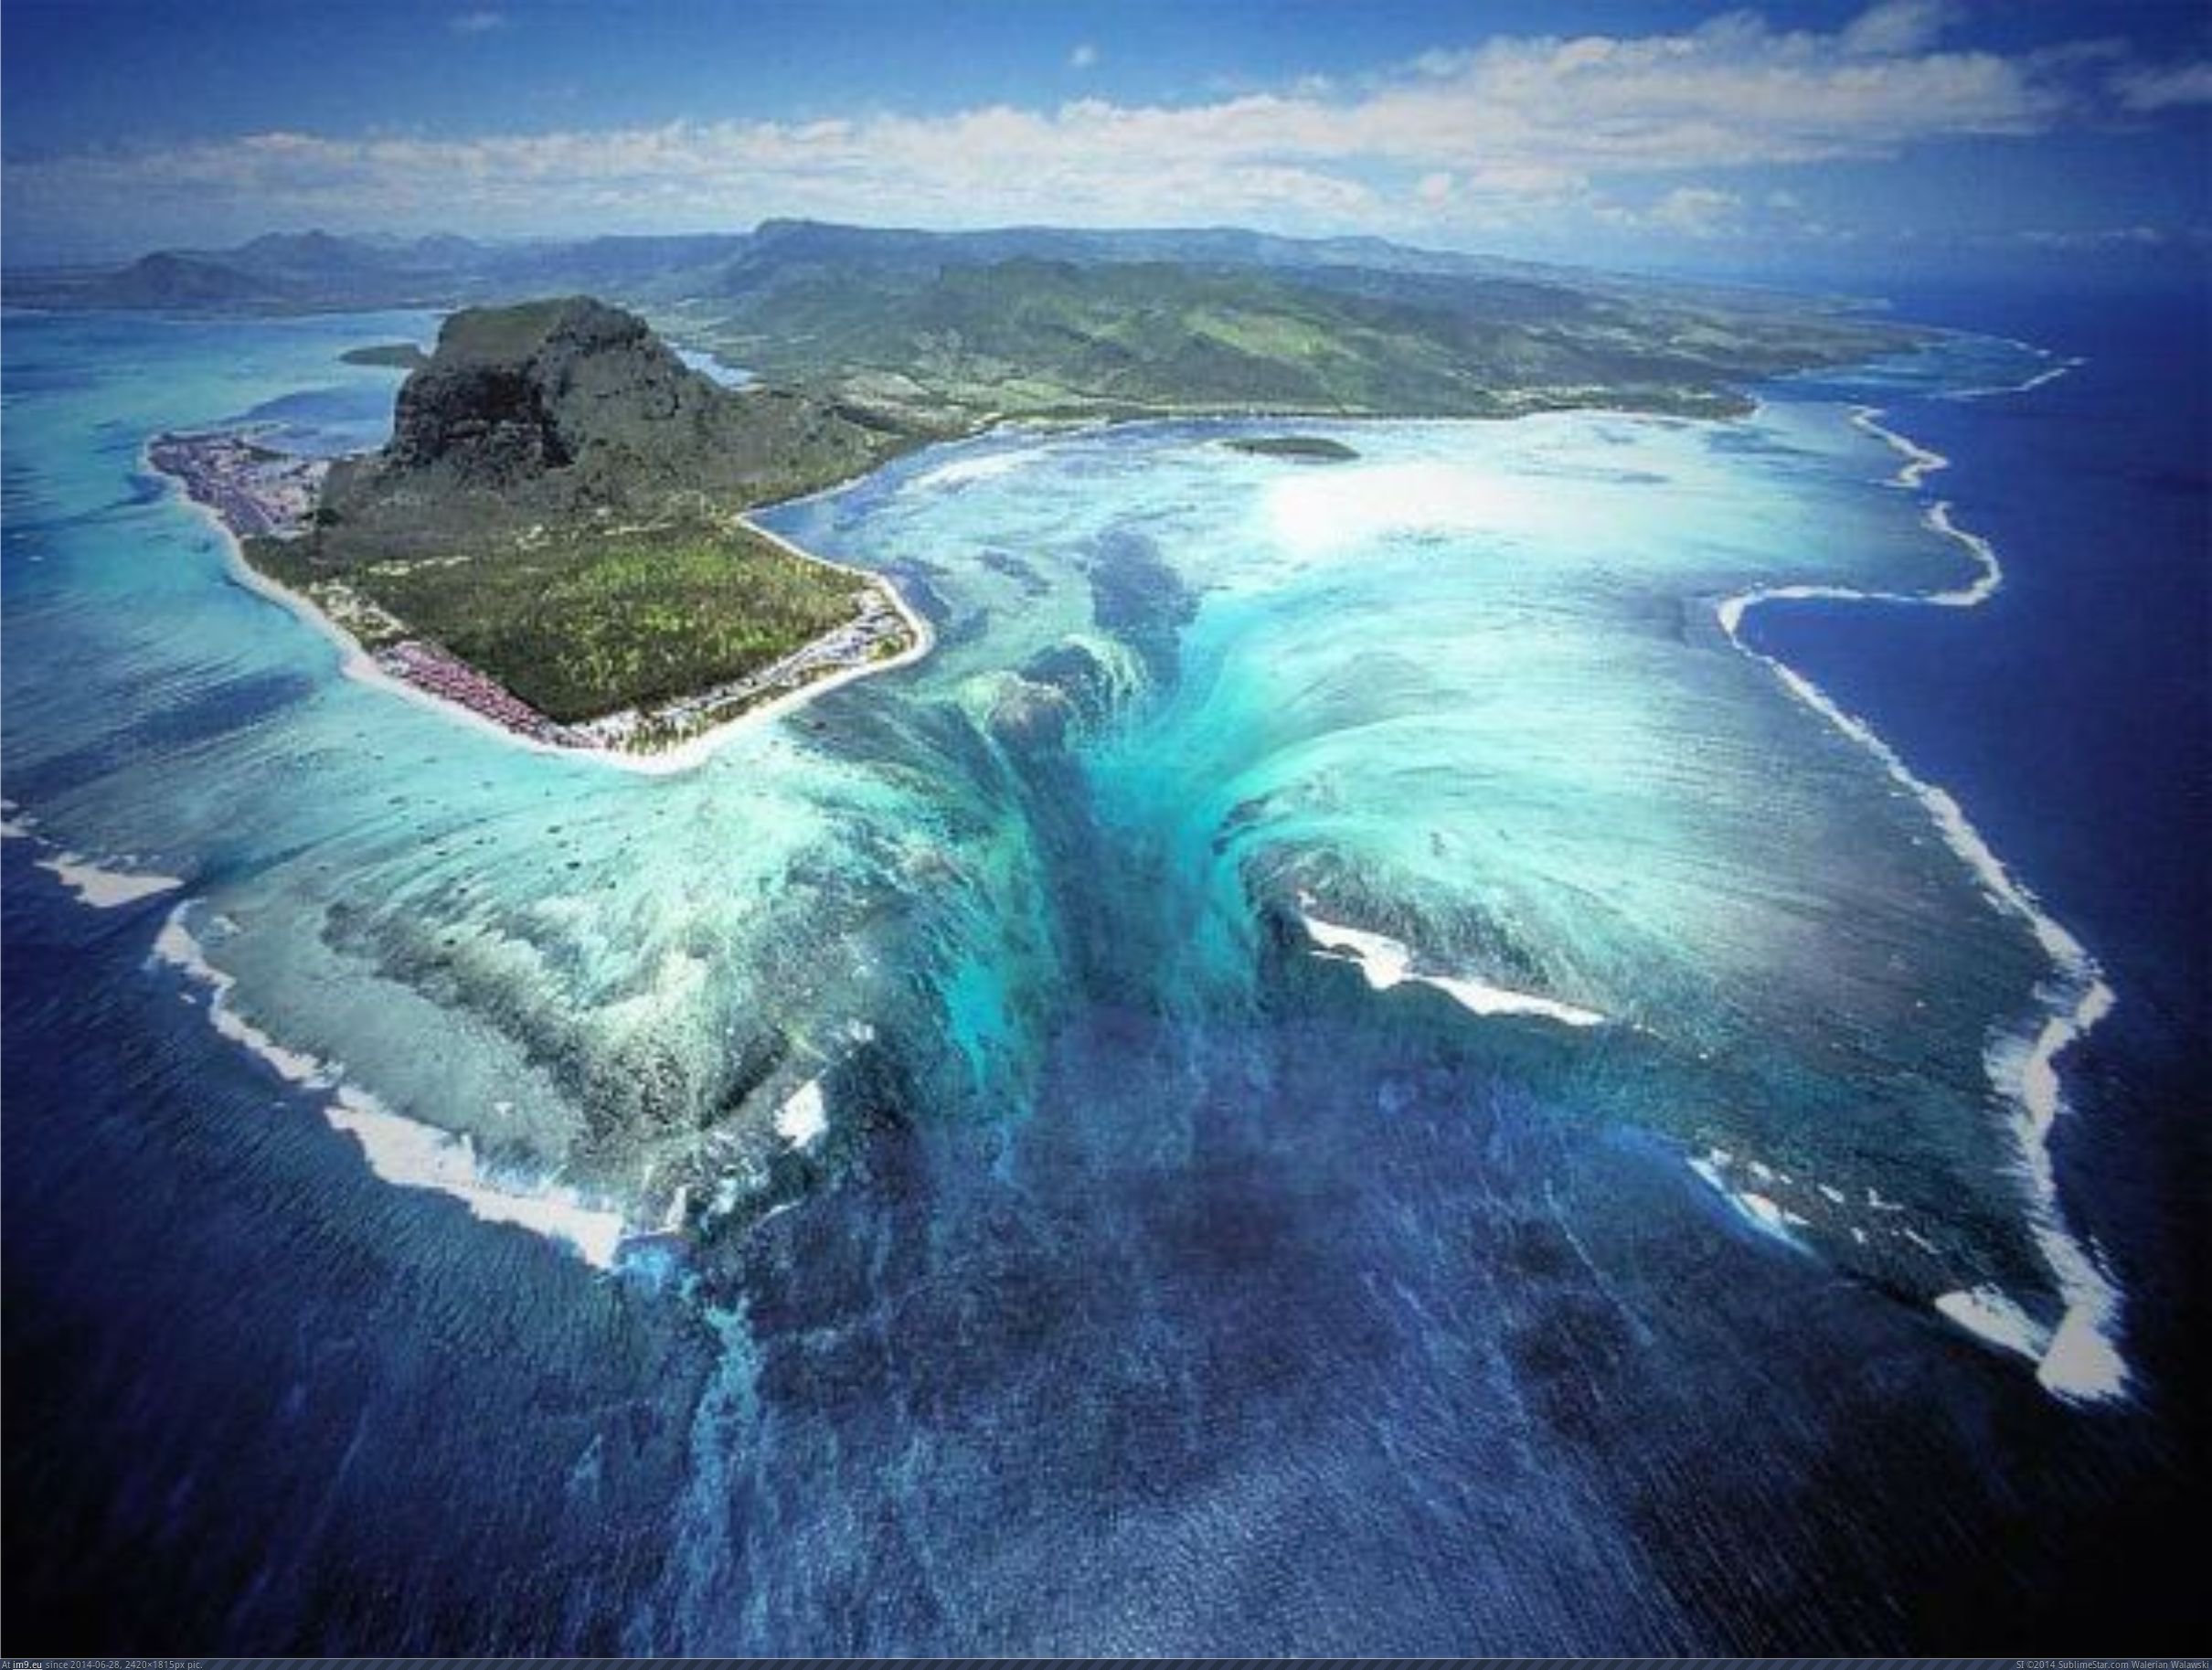 [Earthporn] Enormous underwater plateau - Island of Mauritius - by Michael Friedel [2420x1815] (in My r/EARTHPORN favs)